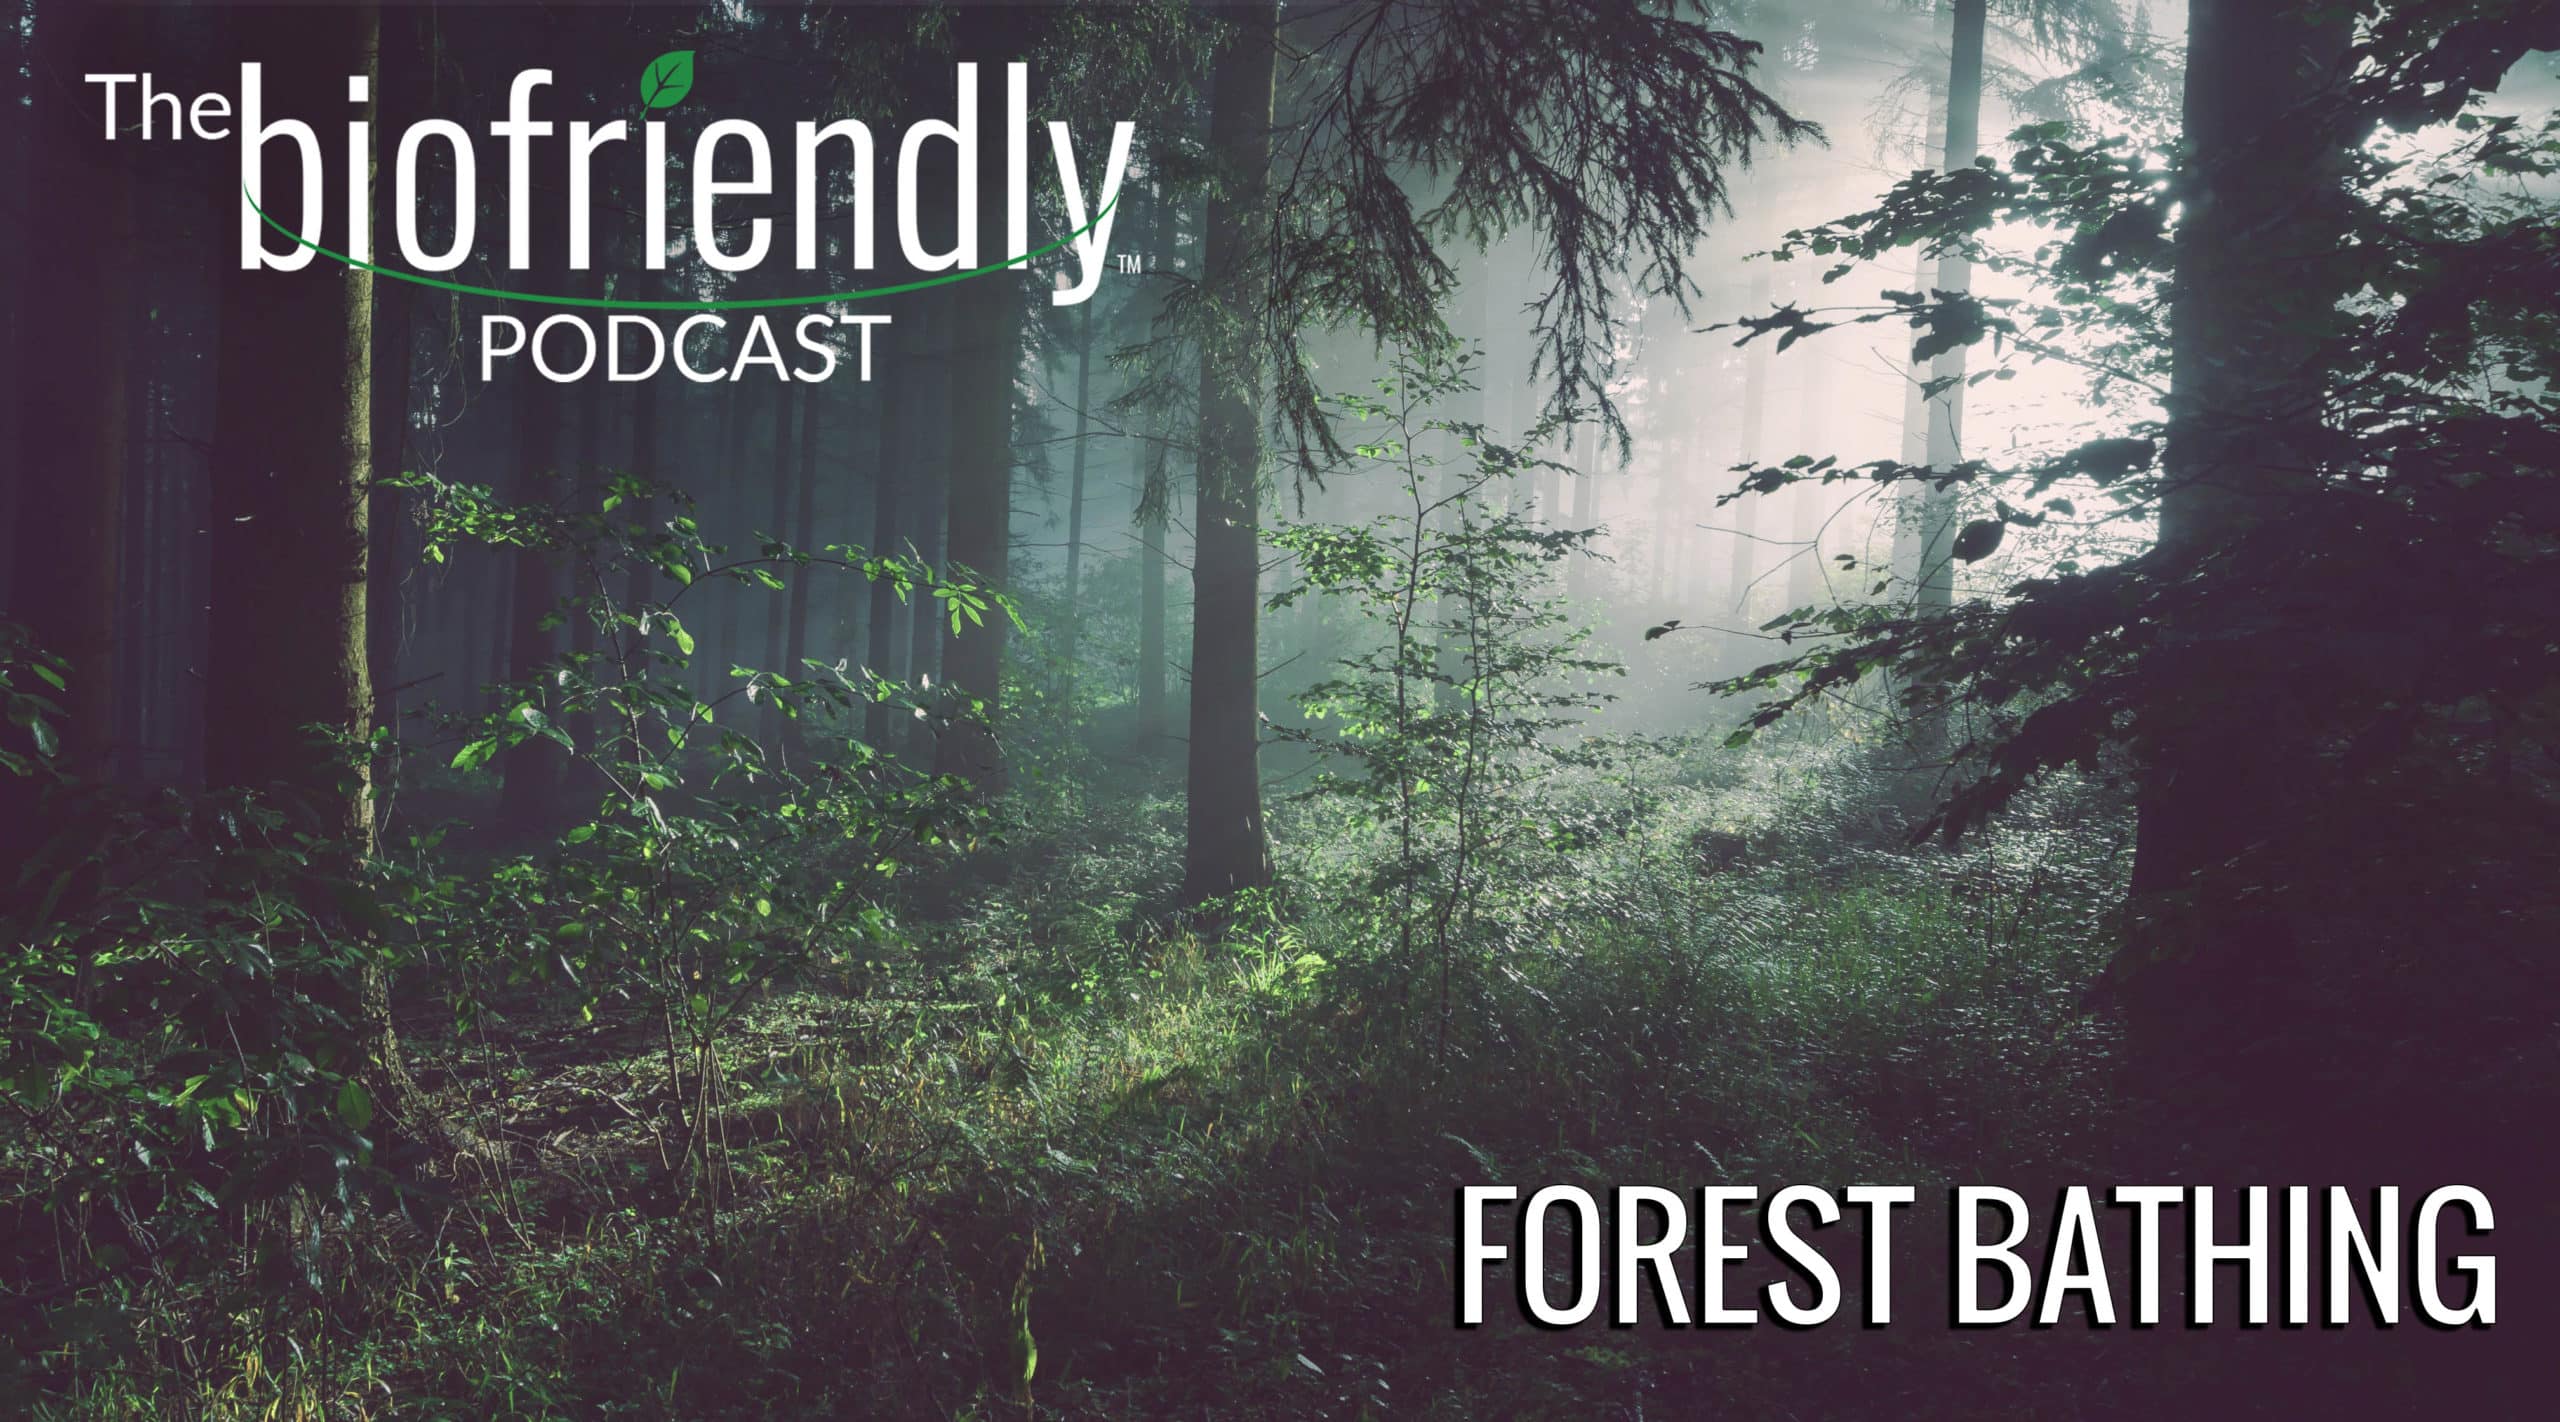 The Biofriendly Podcast - Episode 49 - Forest Bathing